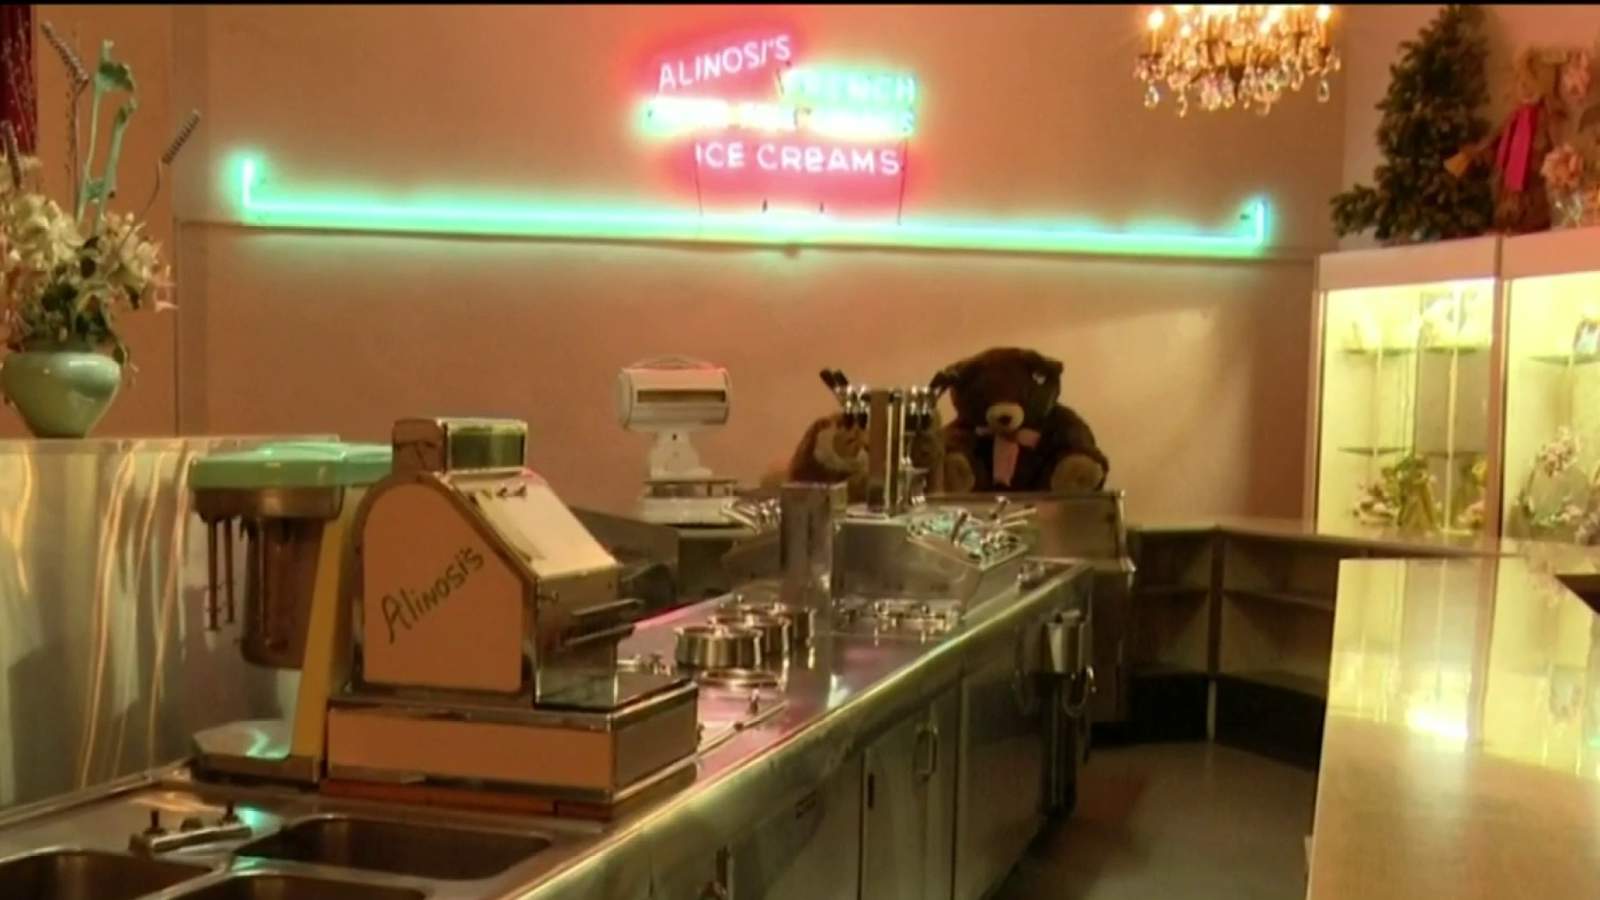 Become part of the sweet history of this Detroit ice cream shop